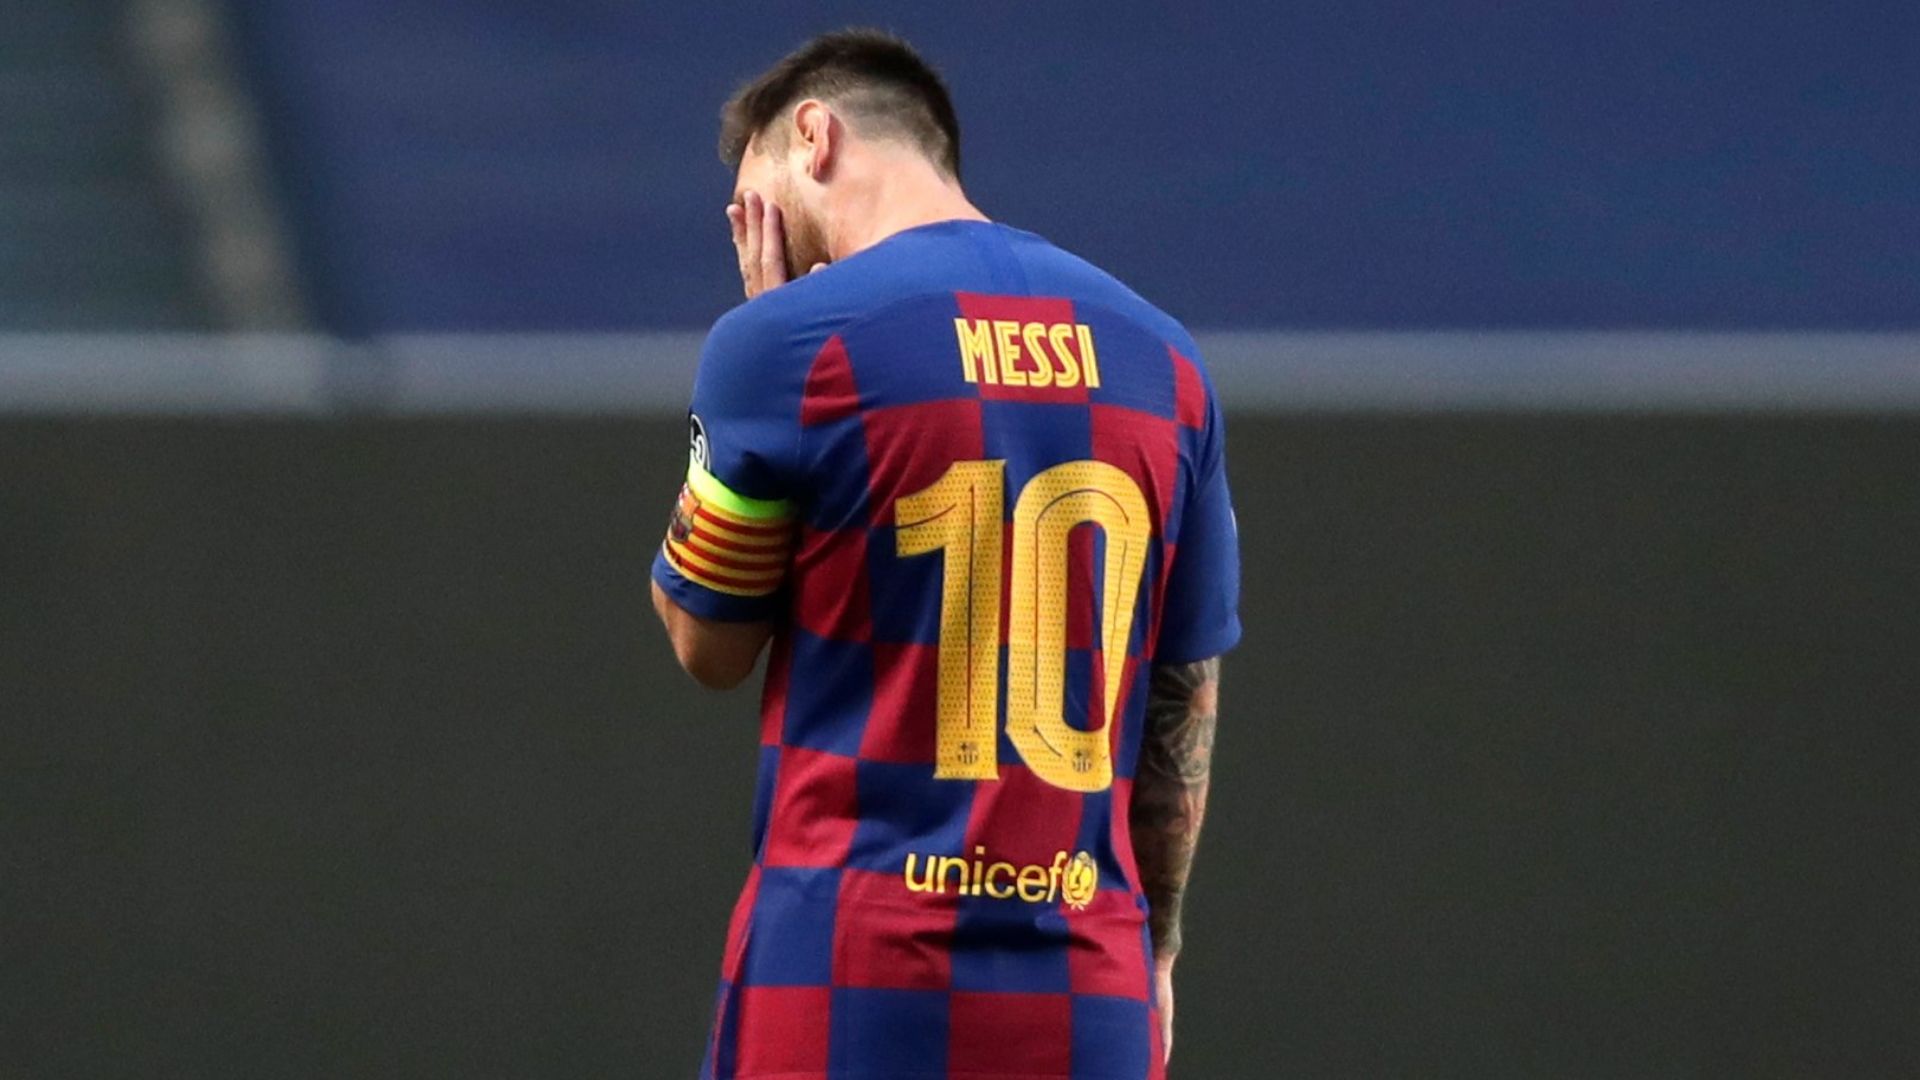 Messi won't have made Barcelona exit call'